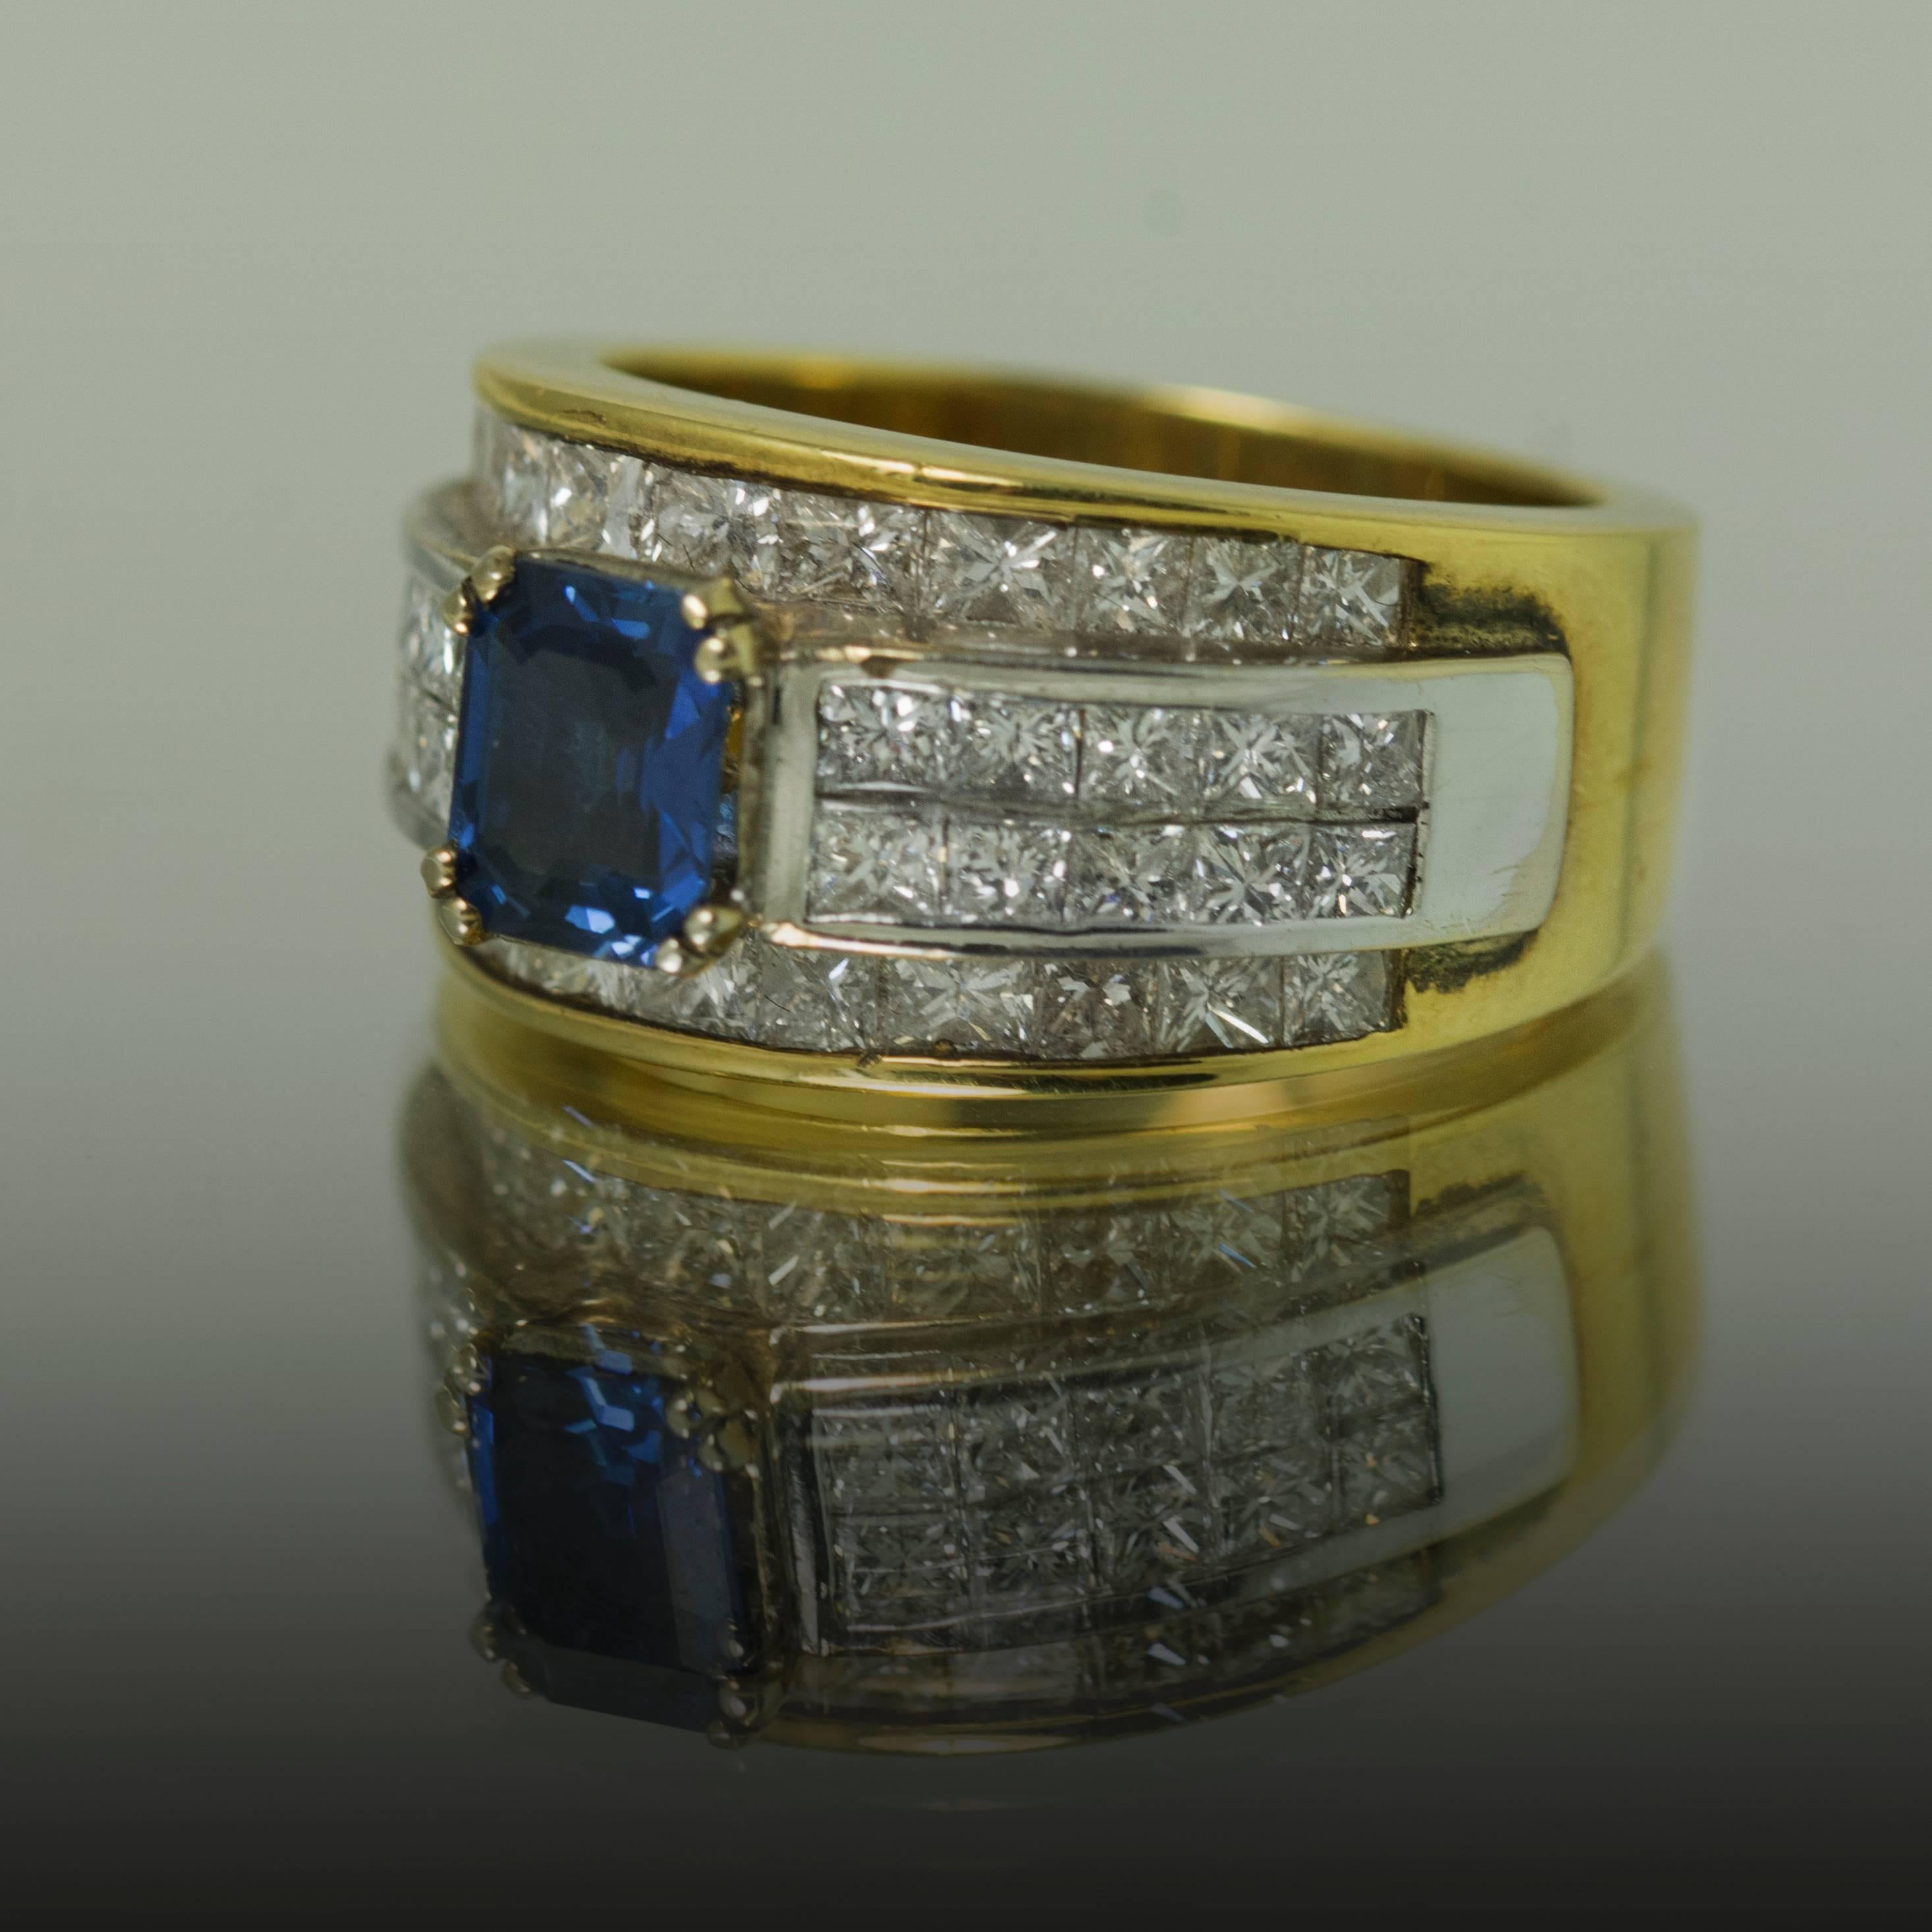 14k Ring with 1 Square cut sapphire weighing 1.05 carats and 30 invisibly set princess cut diamonds weighing 3.06 carats. Size 7